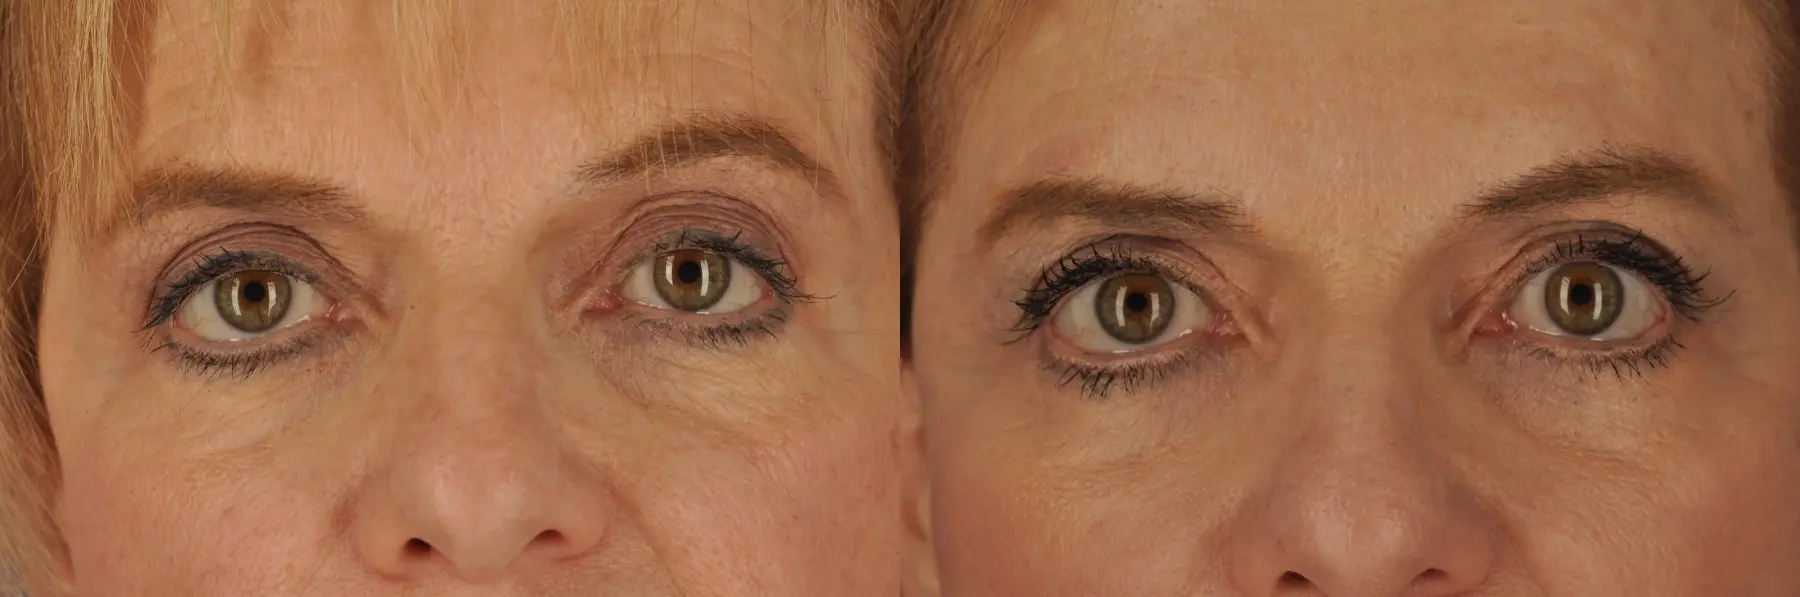 68 year old woman, revision blepharoplasty - Before and After